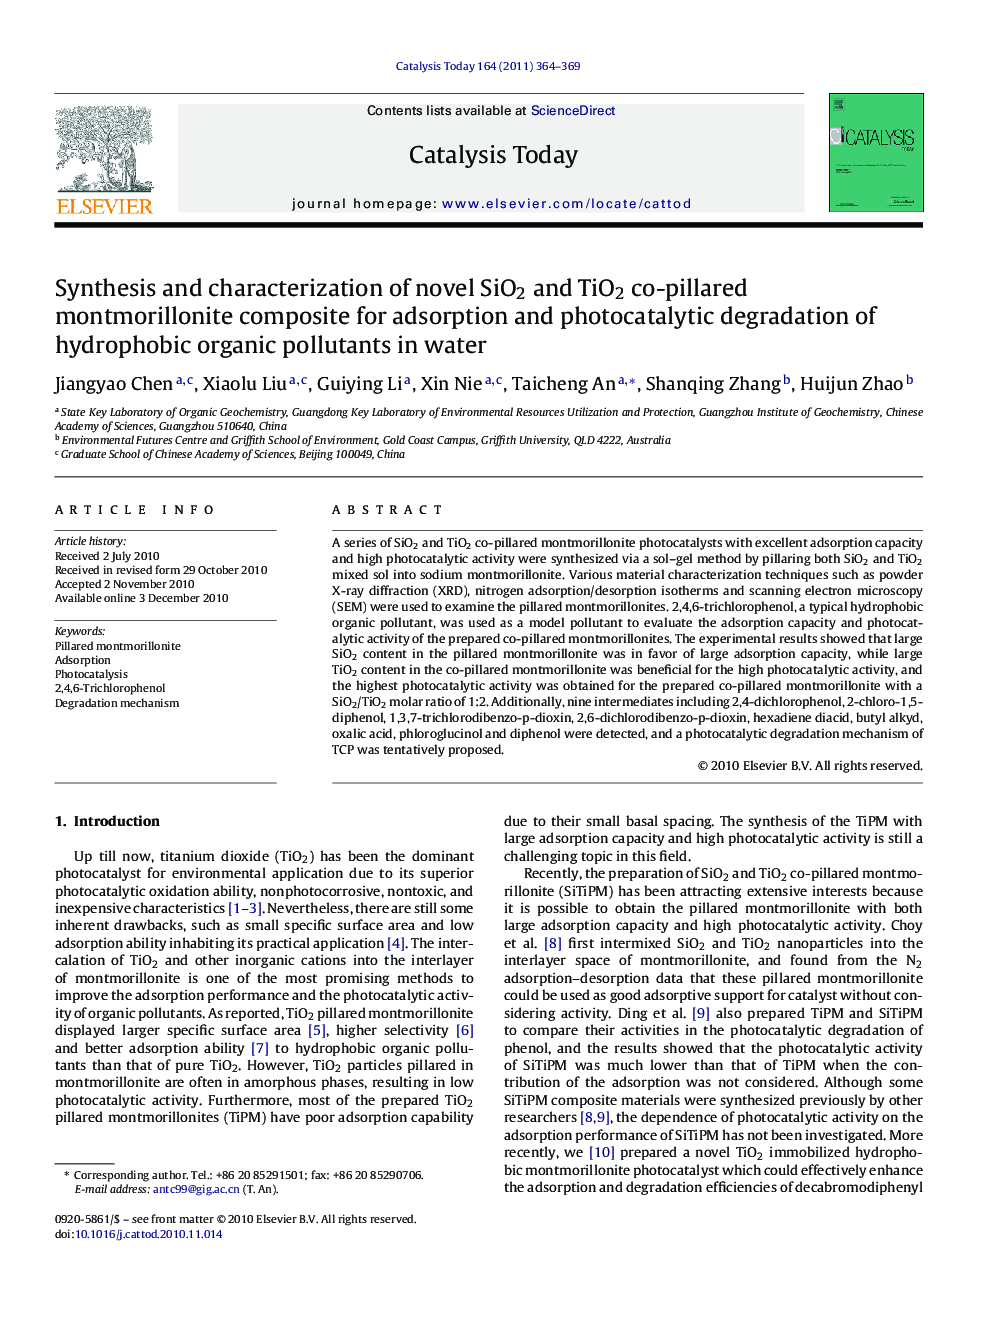 Synthesis and characterization of novel SiO2 and TiO2 co-pillared montmorillonite composite for adsorption and photocatalytic degradation of hydrophobic organic pollutants in water